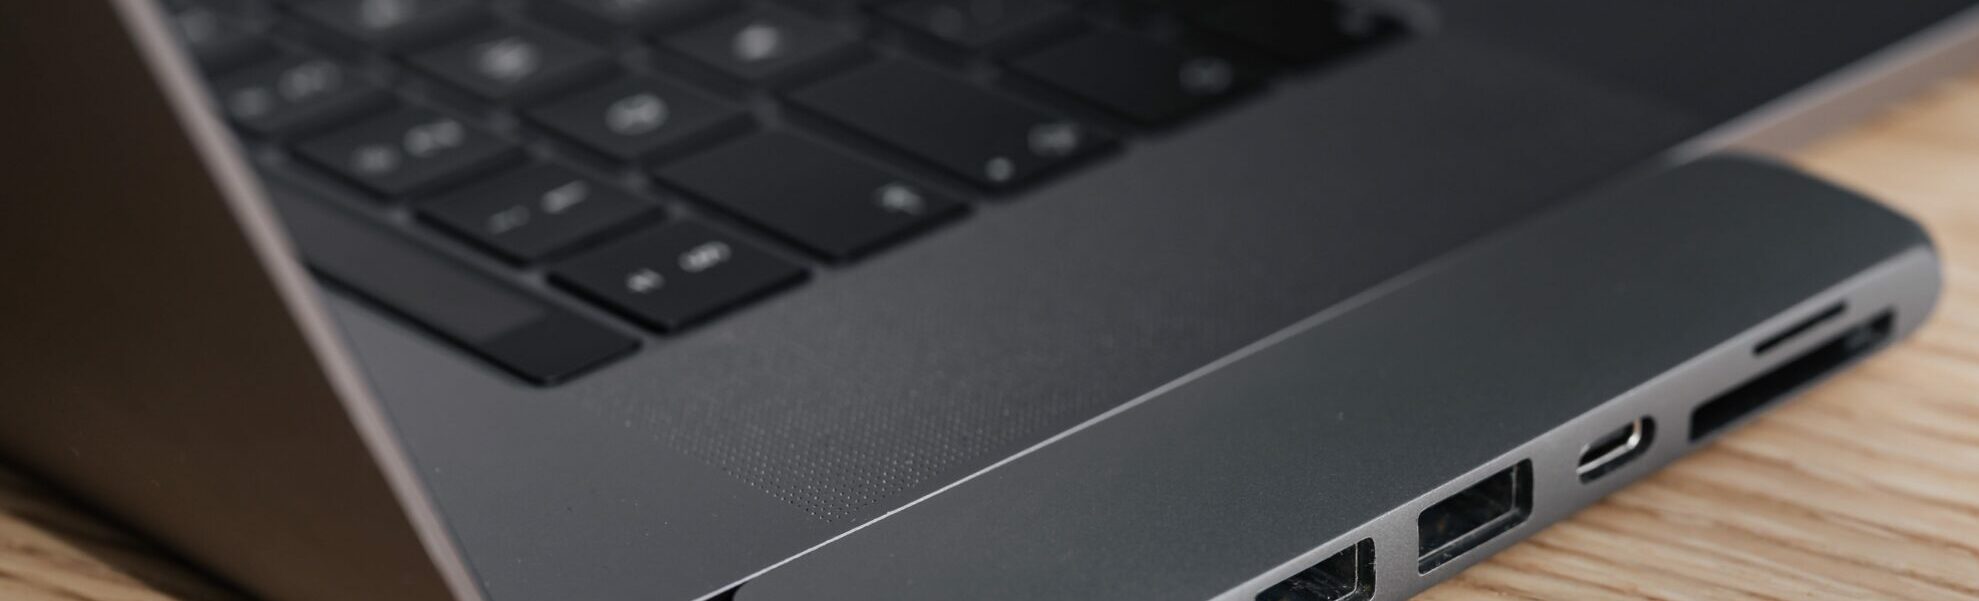 Close-up of laptop side with USB ports on wooden surface.